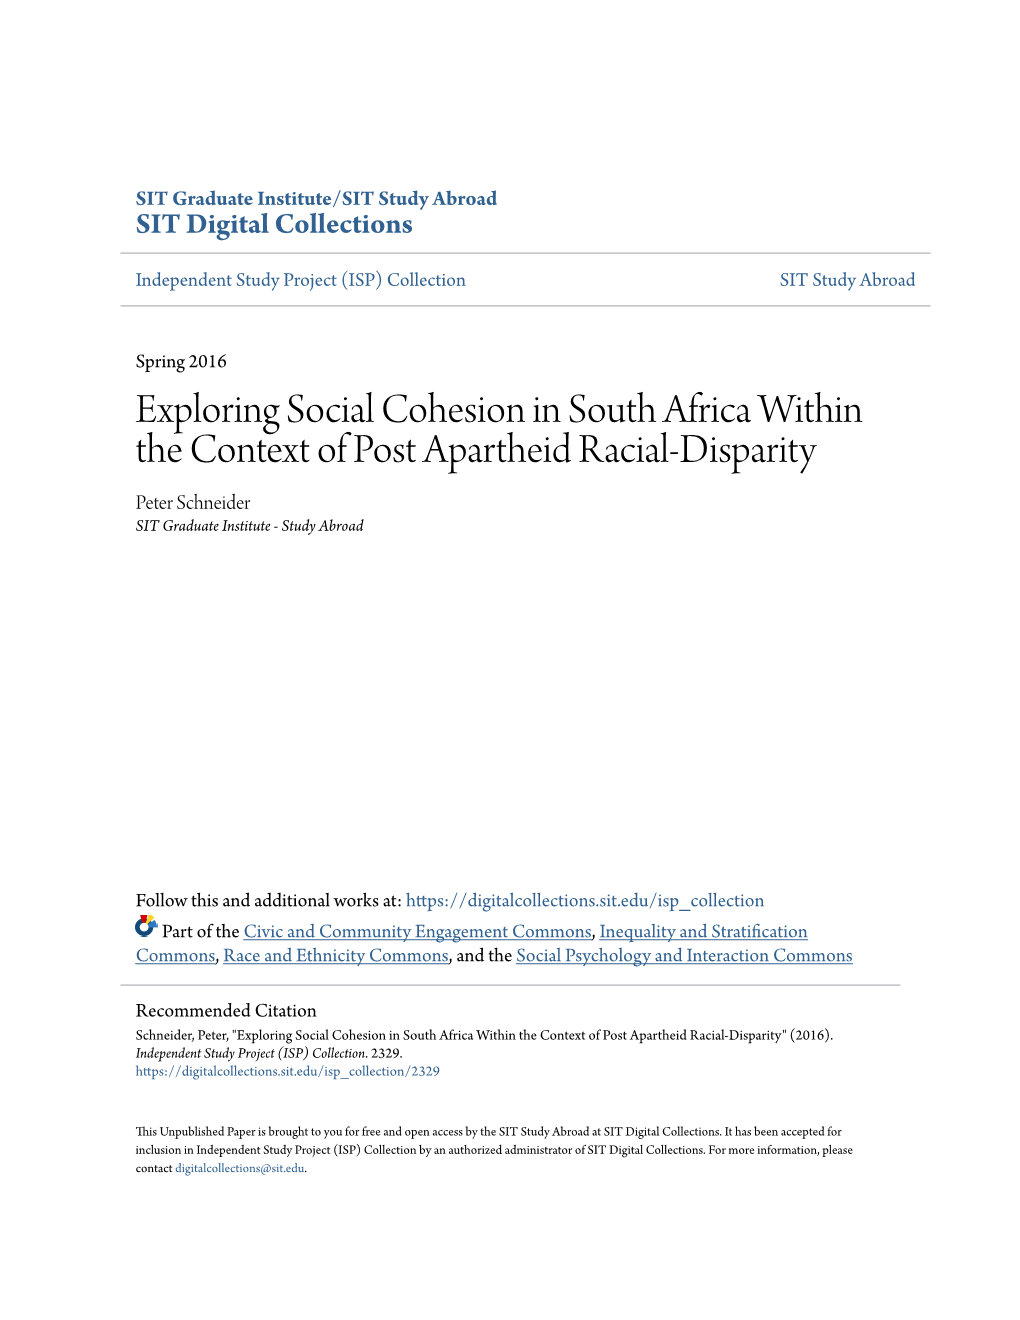 Exploring Social Cohesion in South Africa Within the Context of Post Apartheid Racial-Disparity Peter Schneider SIT Graduate Institute - Study Abroad